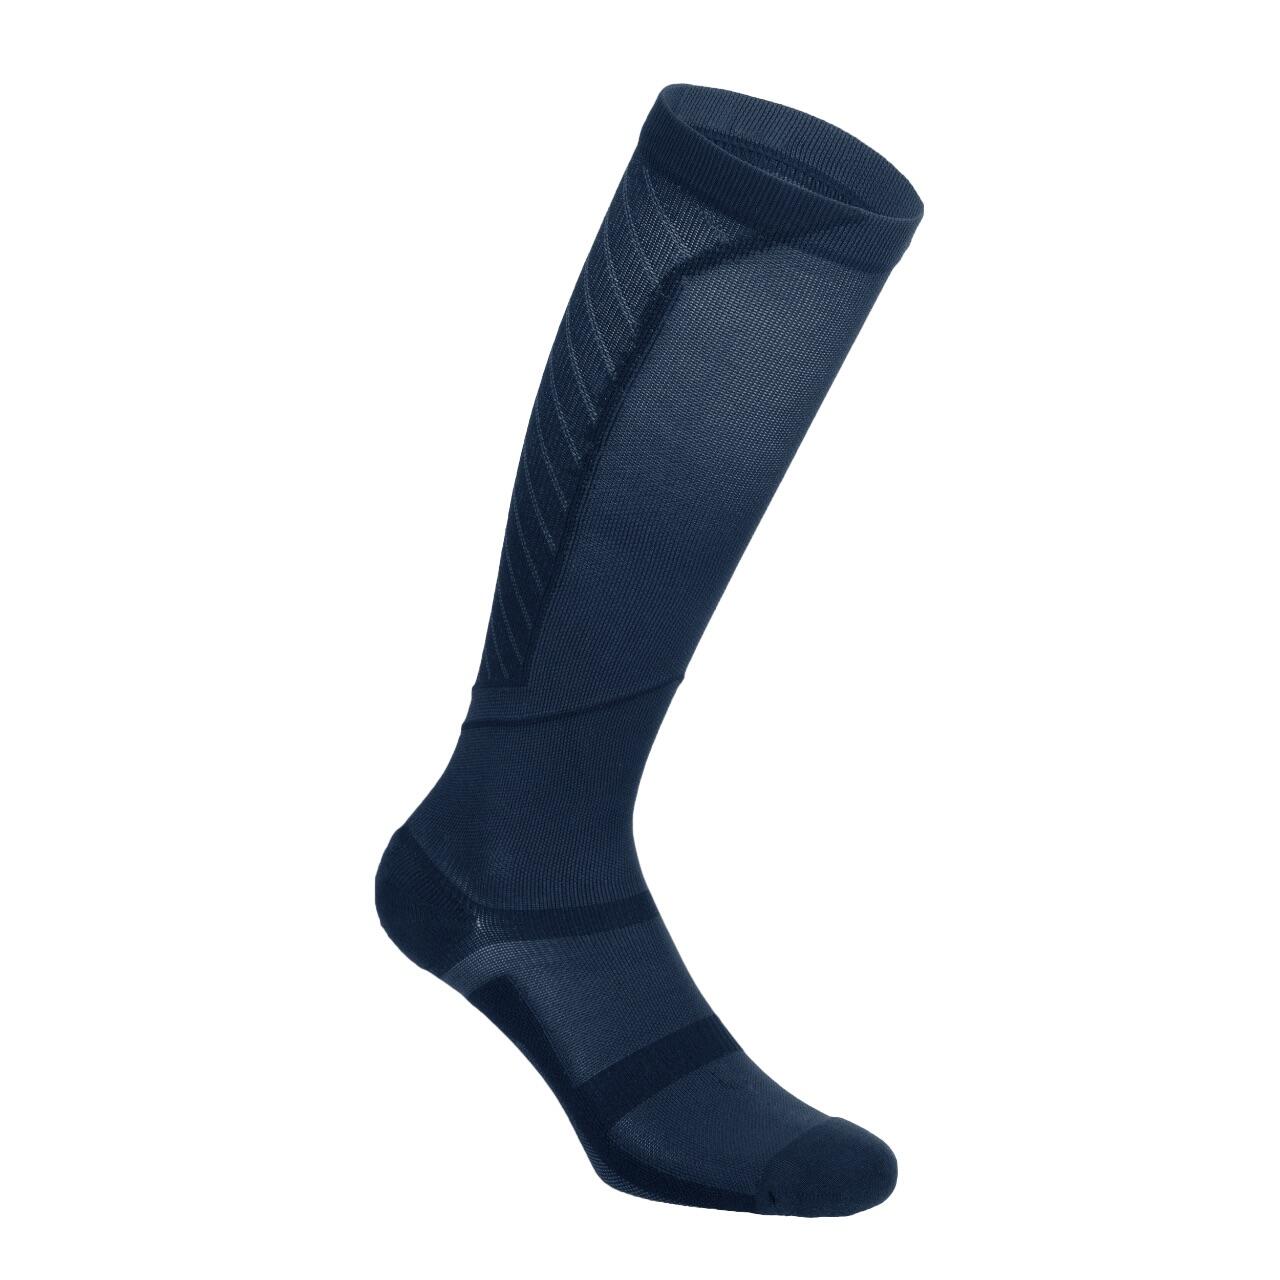 Compression Socks and Sleeves